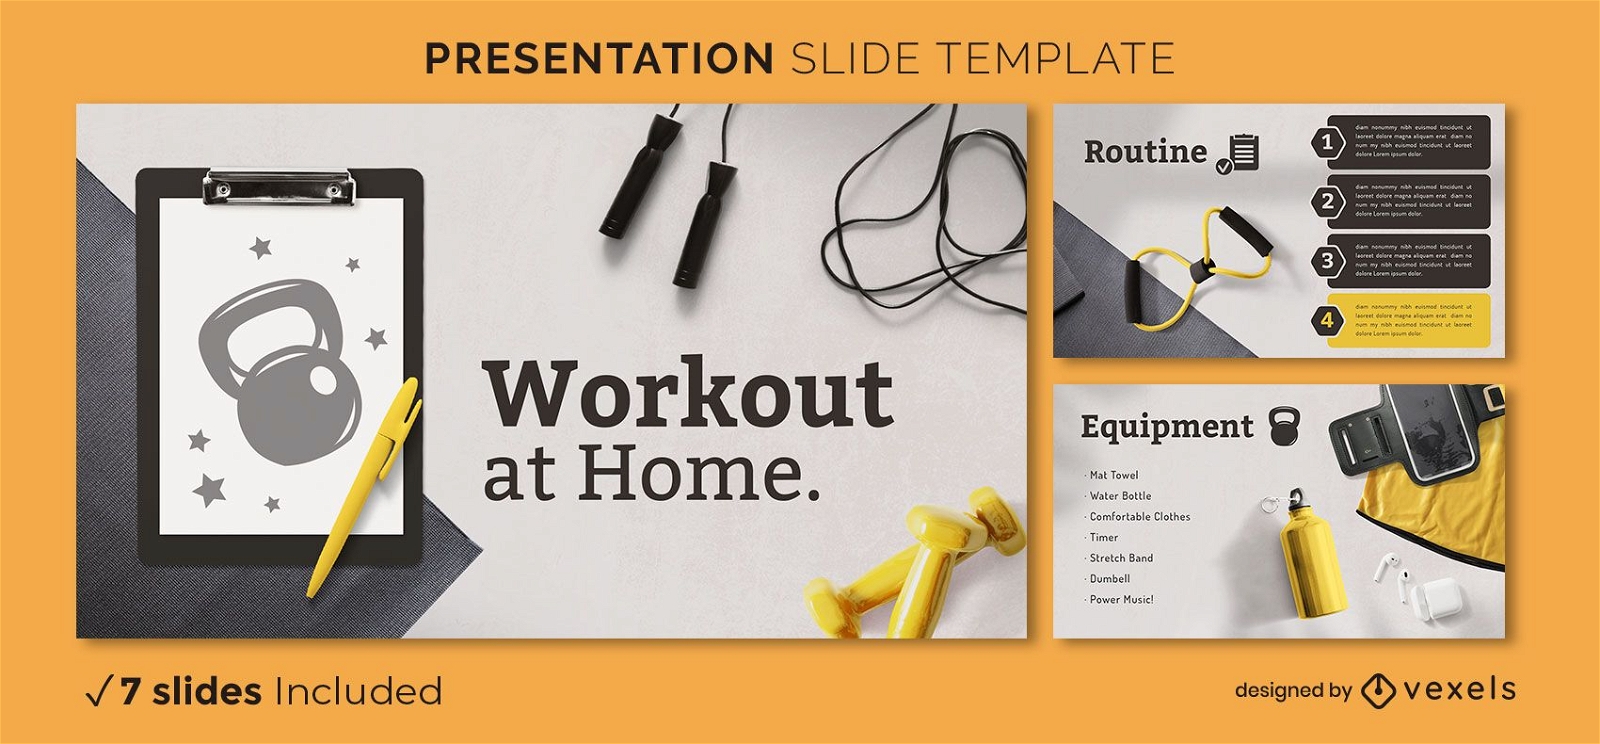 Workout at home presentation template